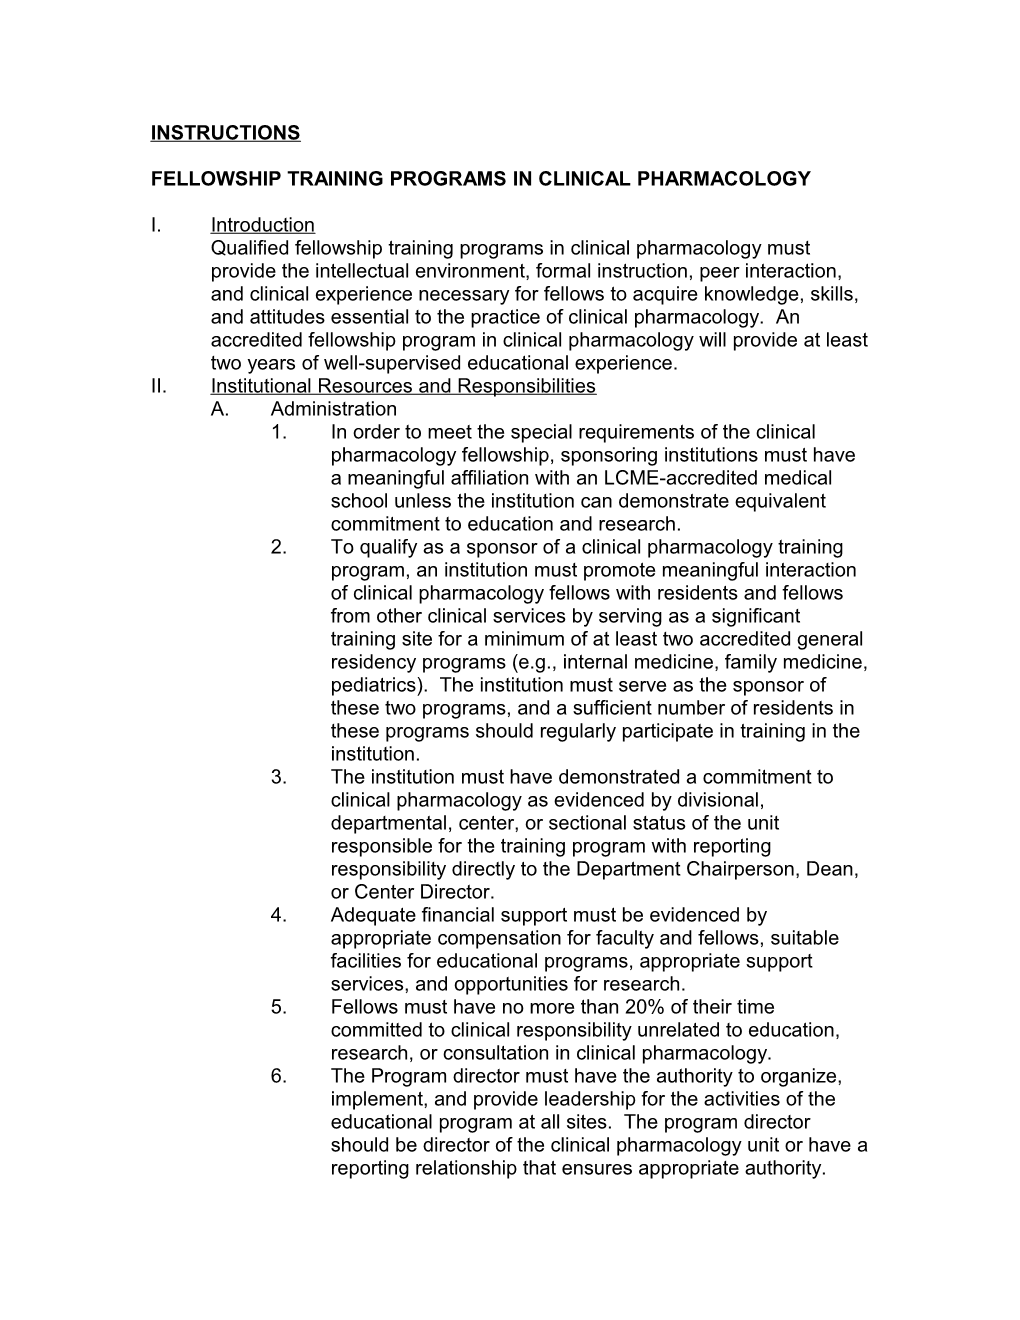 Fellowship Training Programs in Clinical Pharmacology